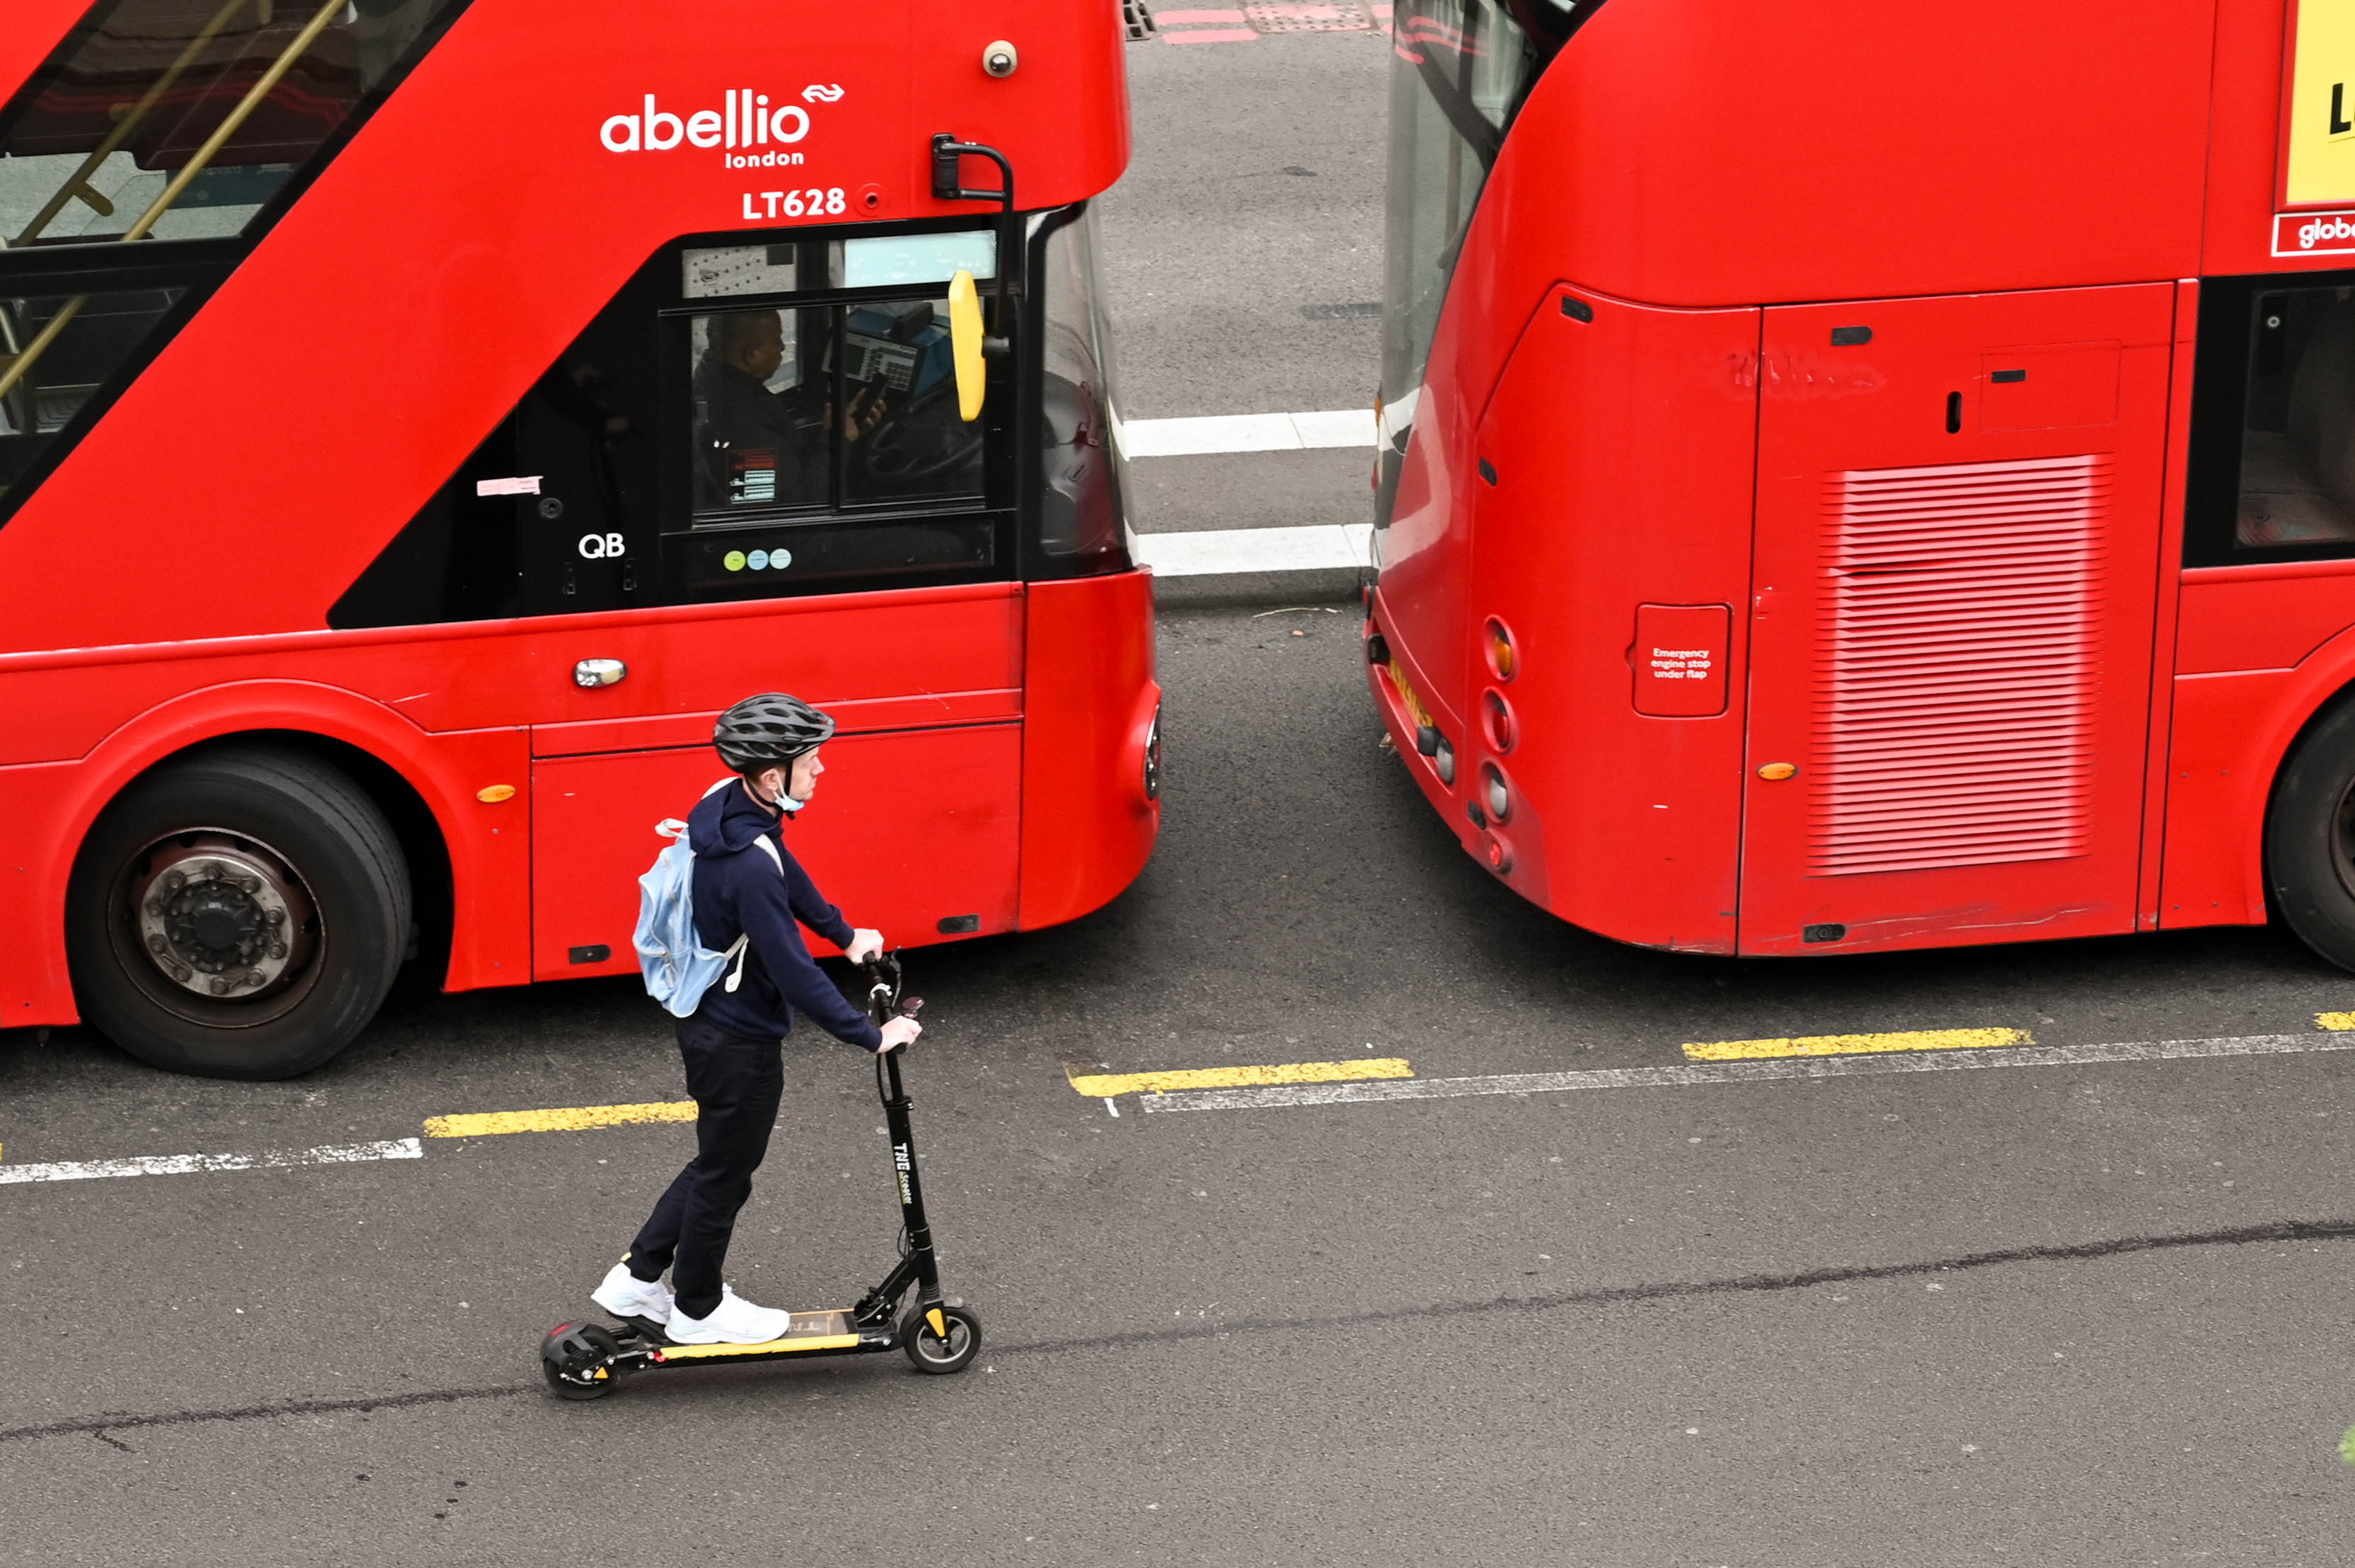 Will the UK Government Change Laws on E-scooters in the Few Months - Or Will We Have to Wait? » Scooter Guide